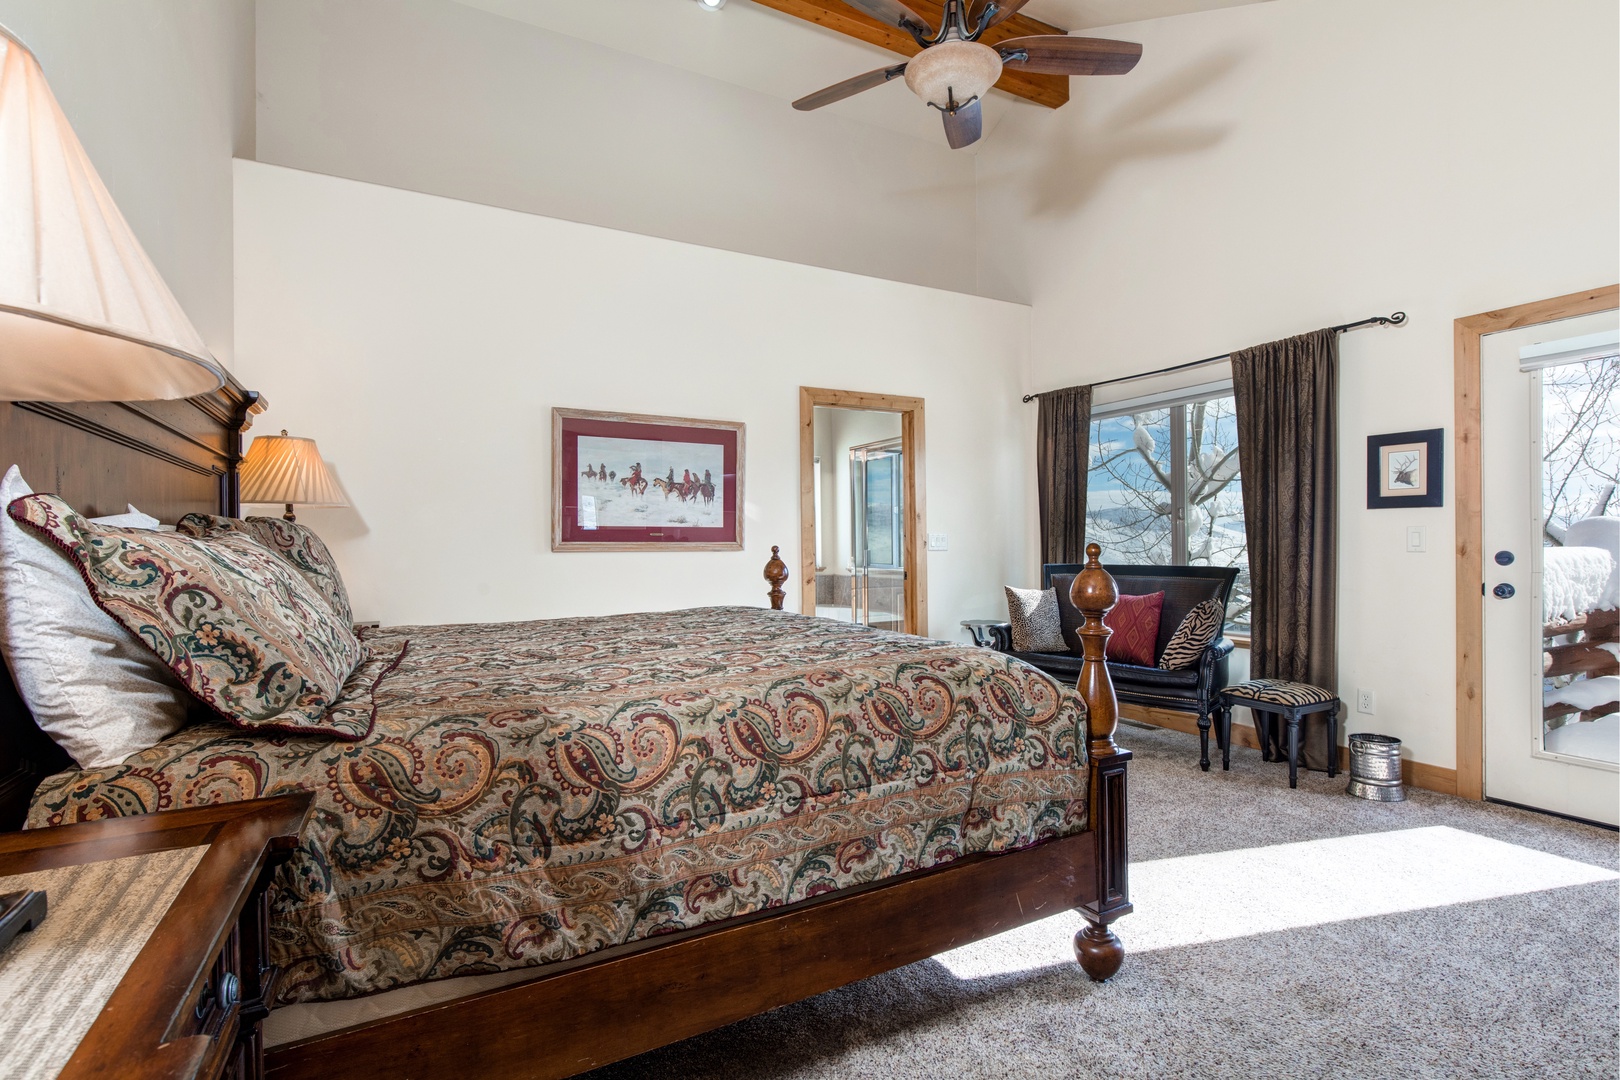 Park City Vacation Rentals, Cedar Ridge Townhouse - Master Bedroom with king bed and ensuite bathroom